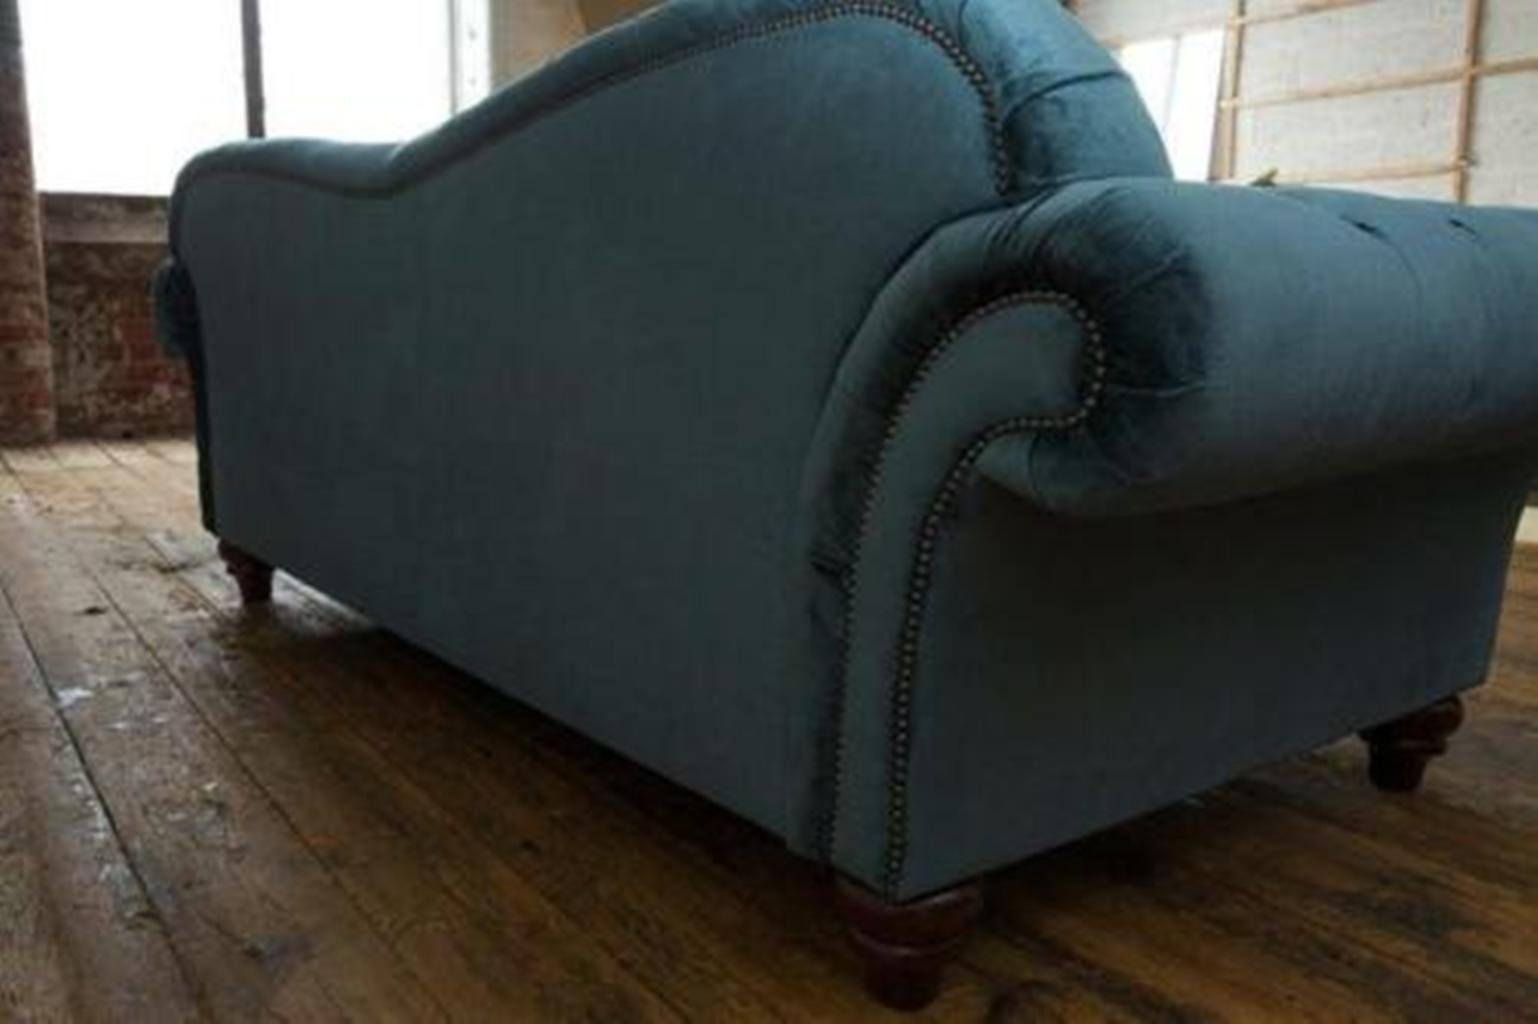 JVmoebel Luxus Sofas Textil Chesterfield Couch Sofa Chesterfield-Sofa,